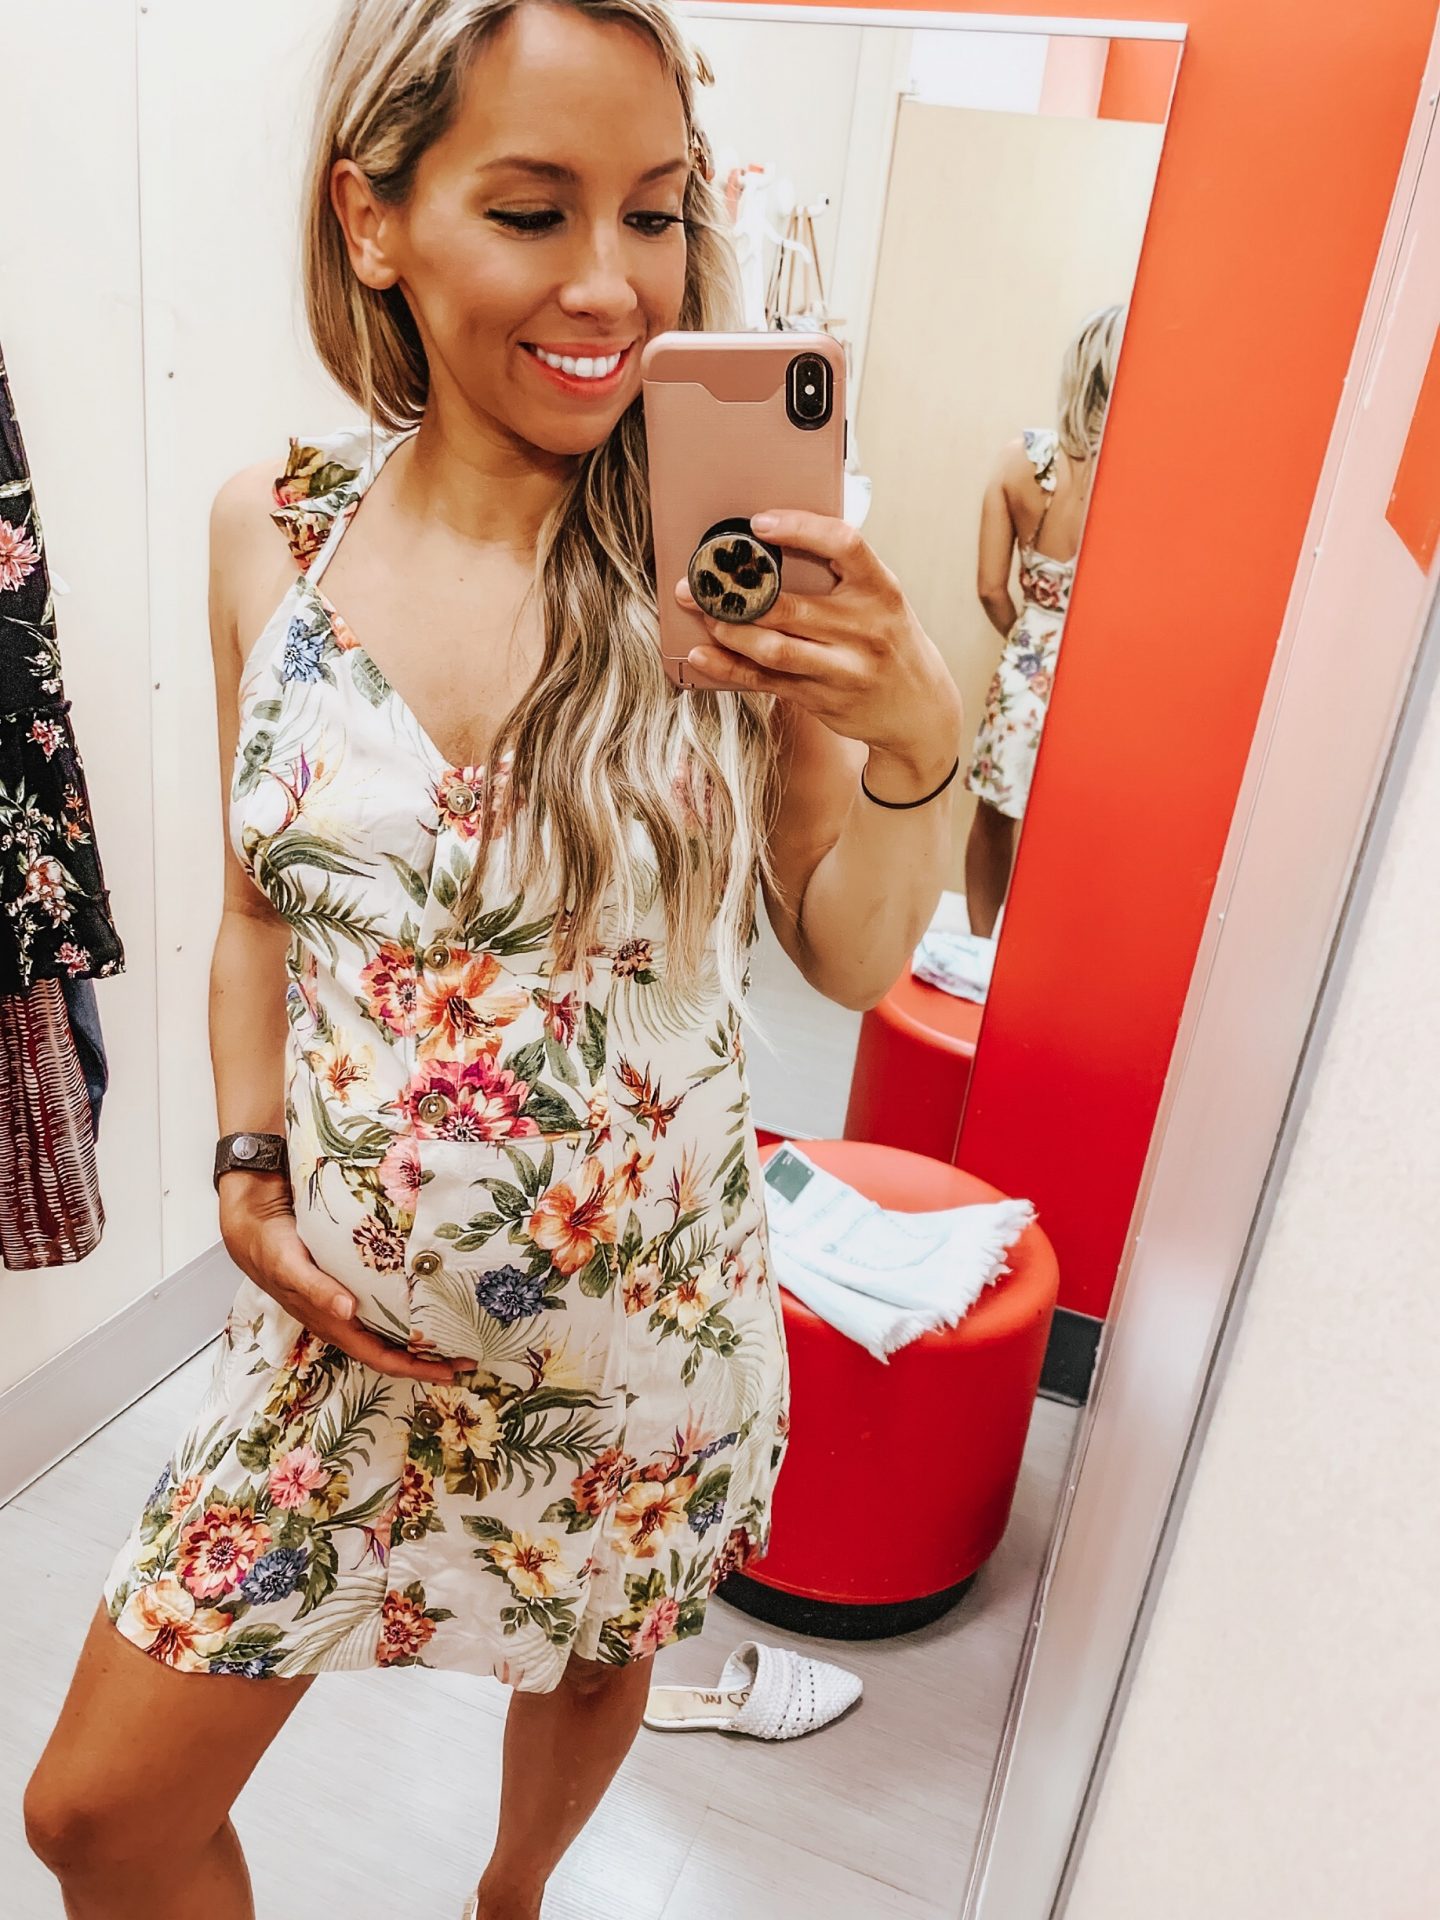 Major Target Haul! With Bump-friendly pieces - According to Blaire